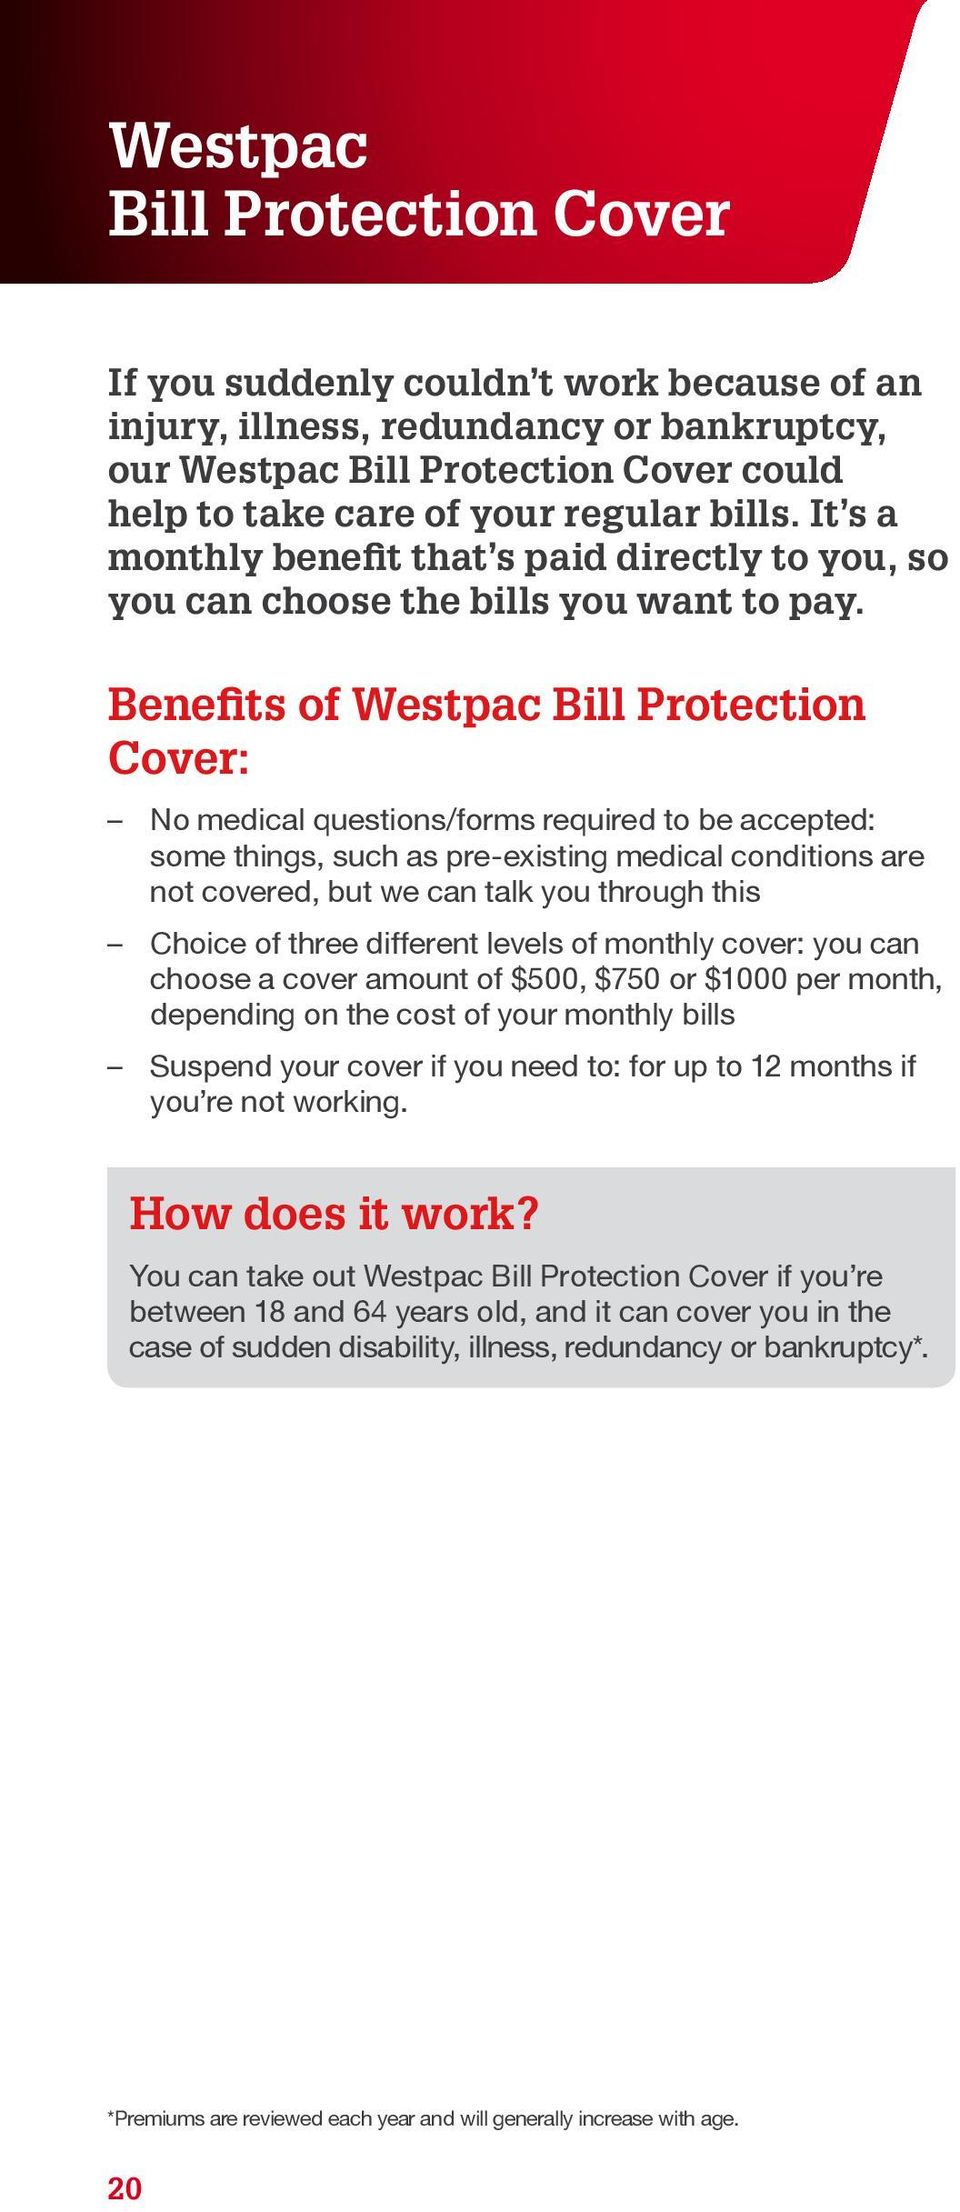 Benefits of Westpac Bill Protection Cover: No medical questions/forms required to be accepted: some things, such as pre-existing medical conditions are not covered, but we can talk you through this